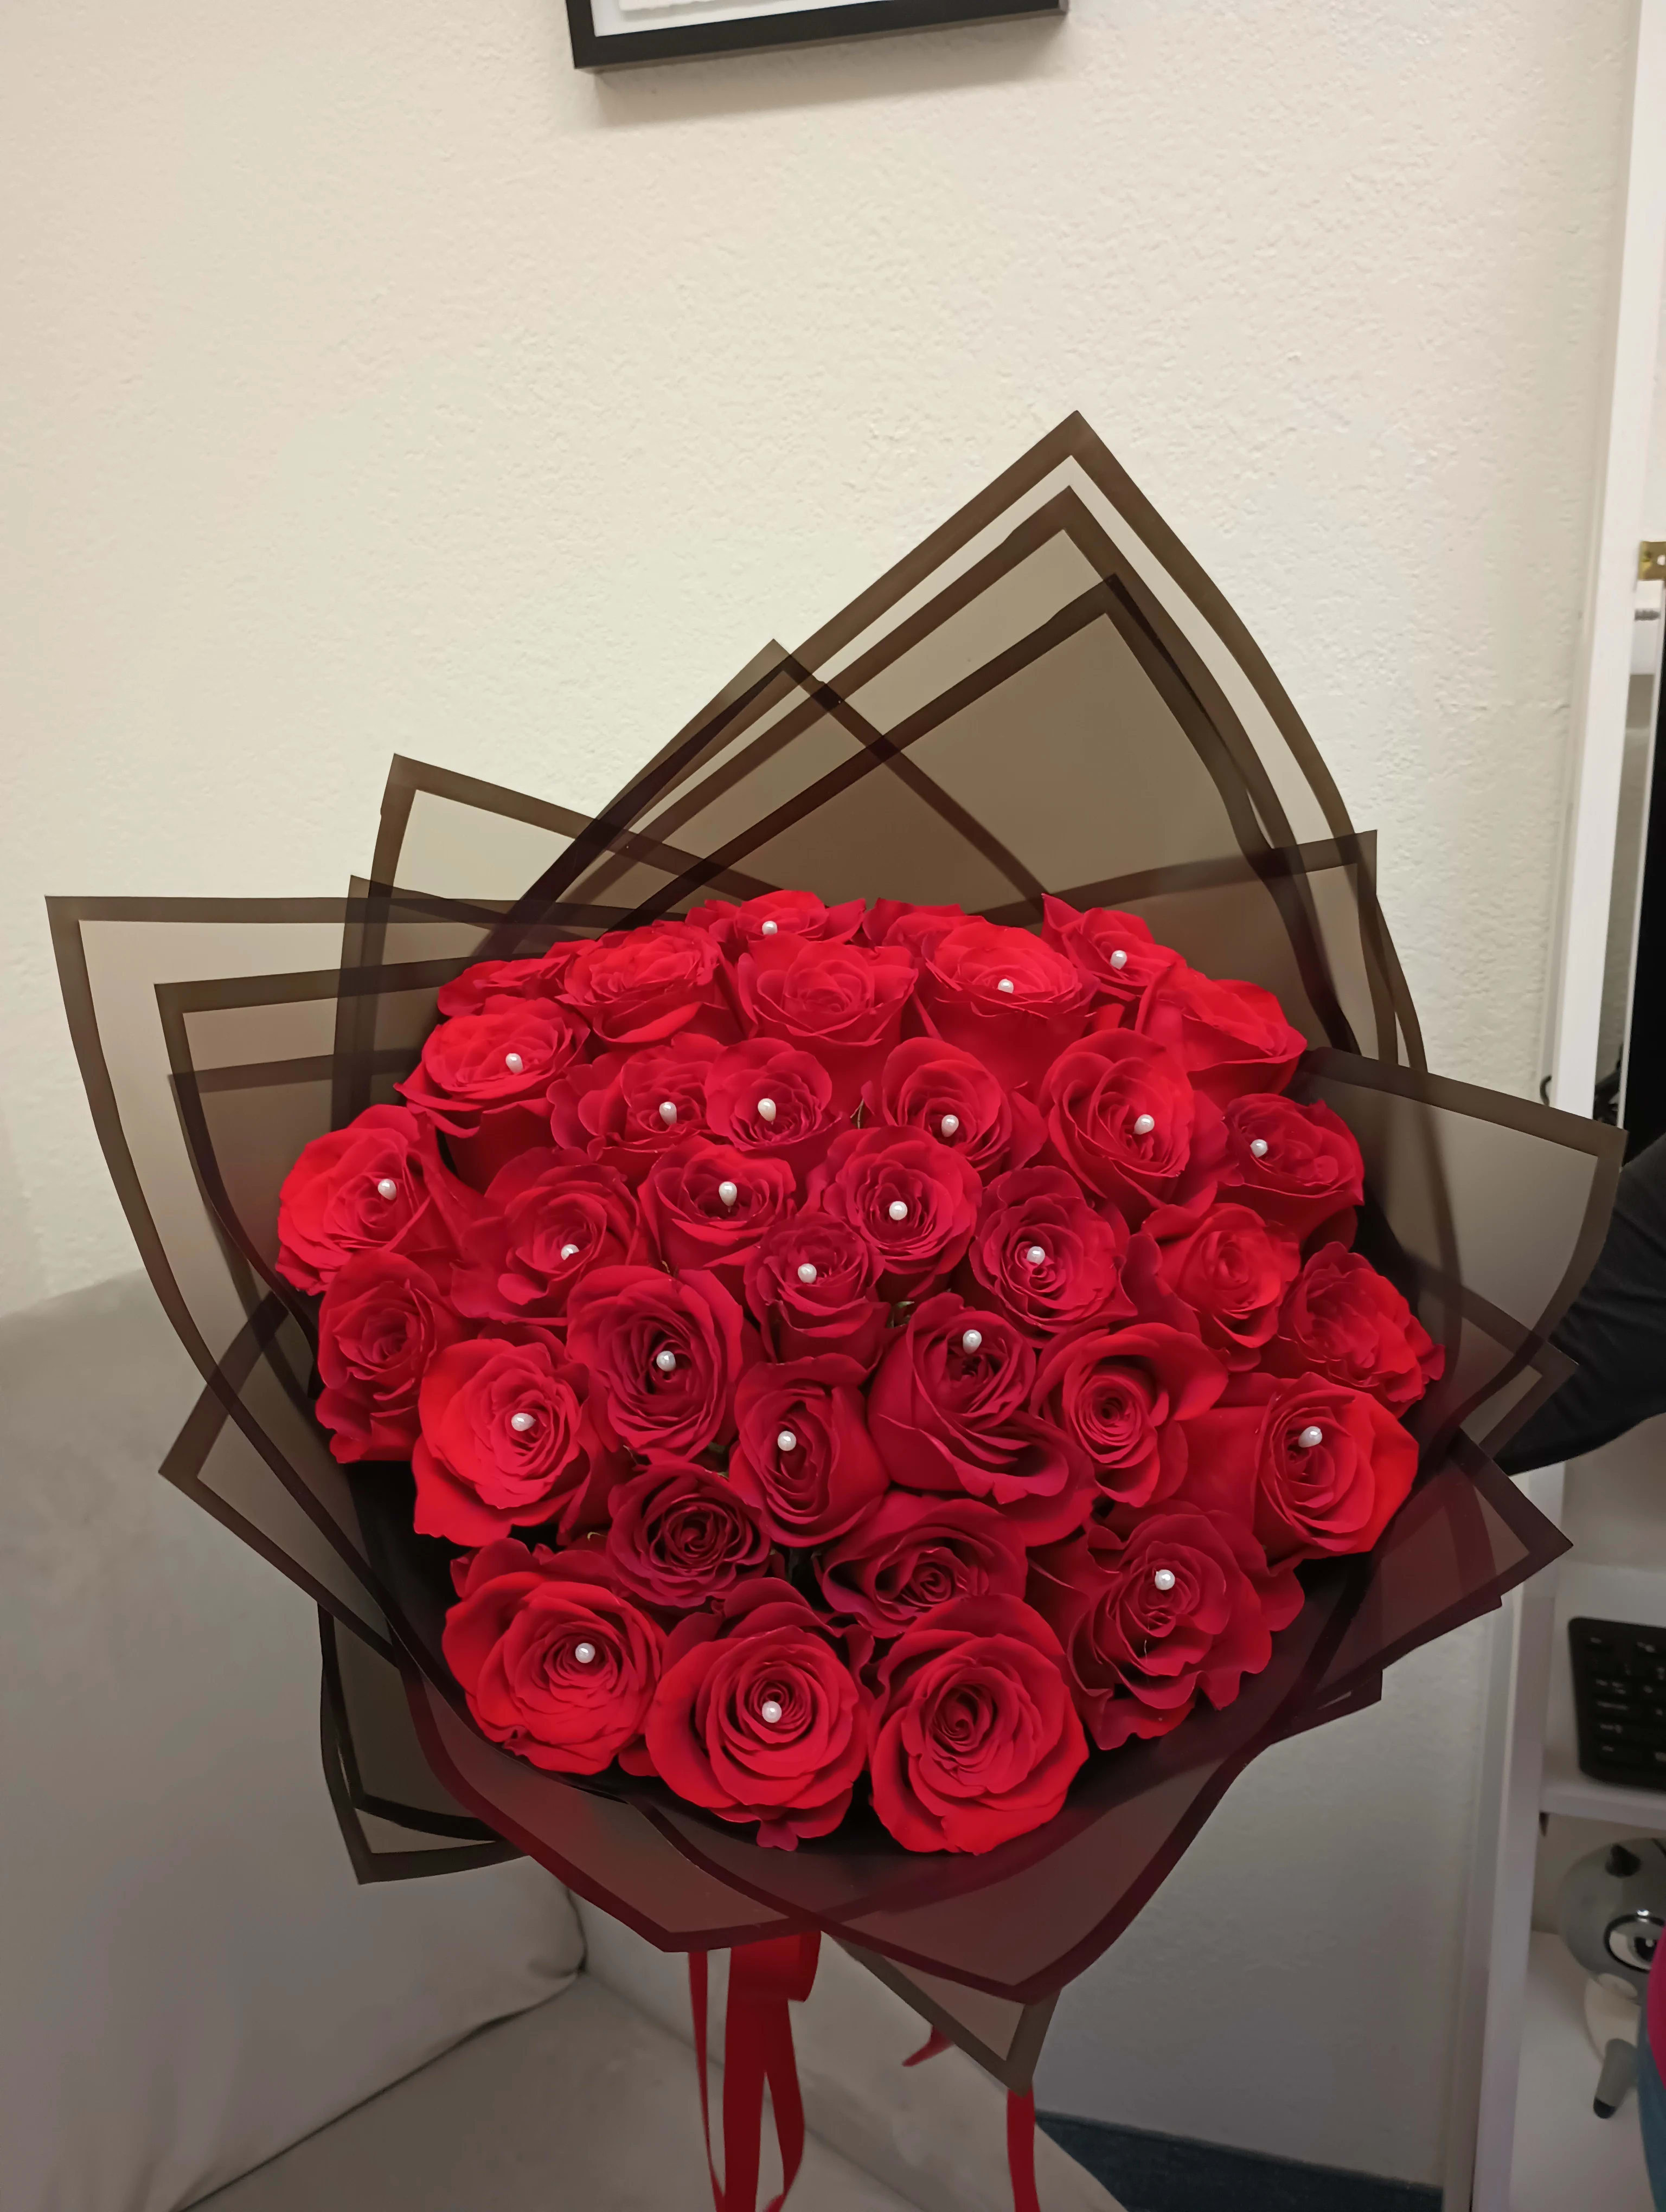 massive red roses bouquet - deluxe 50 red roses!